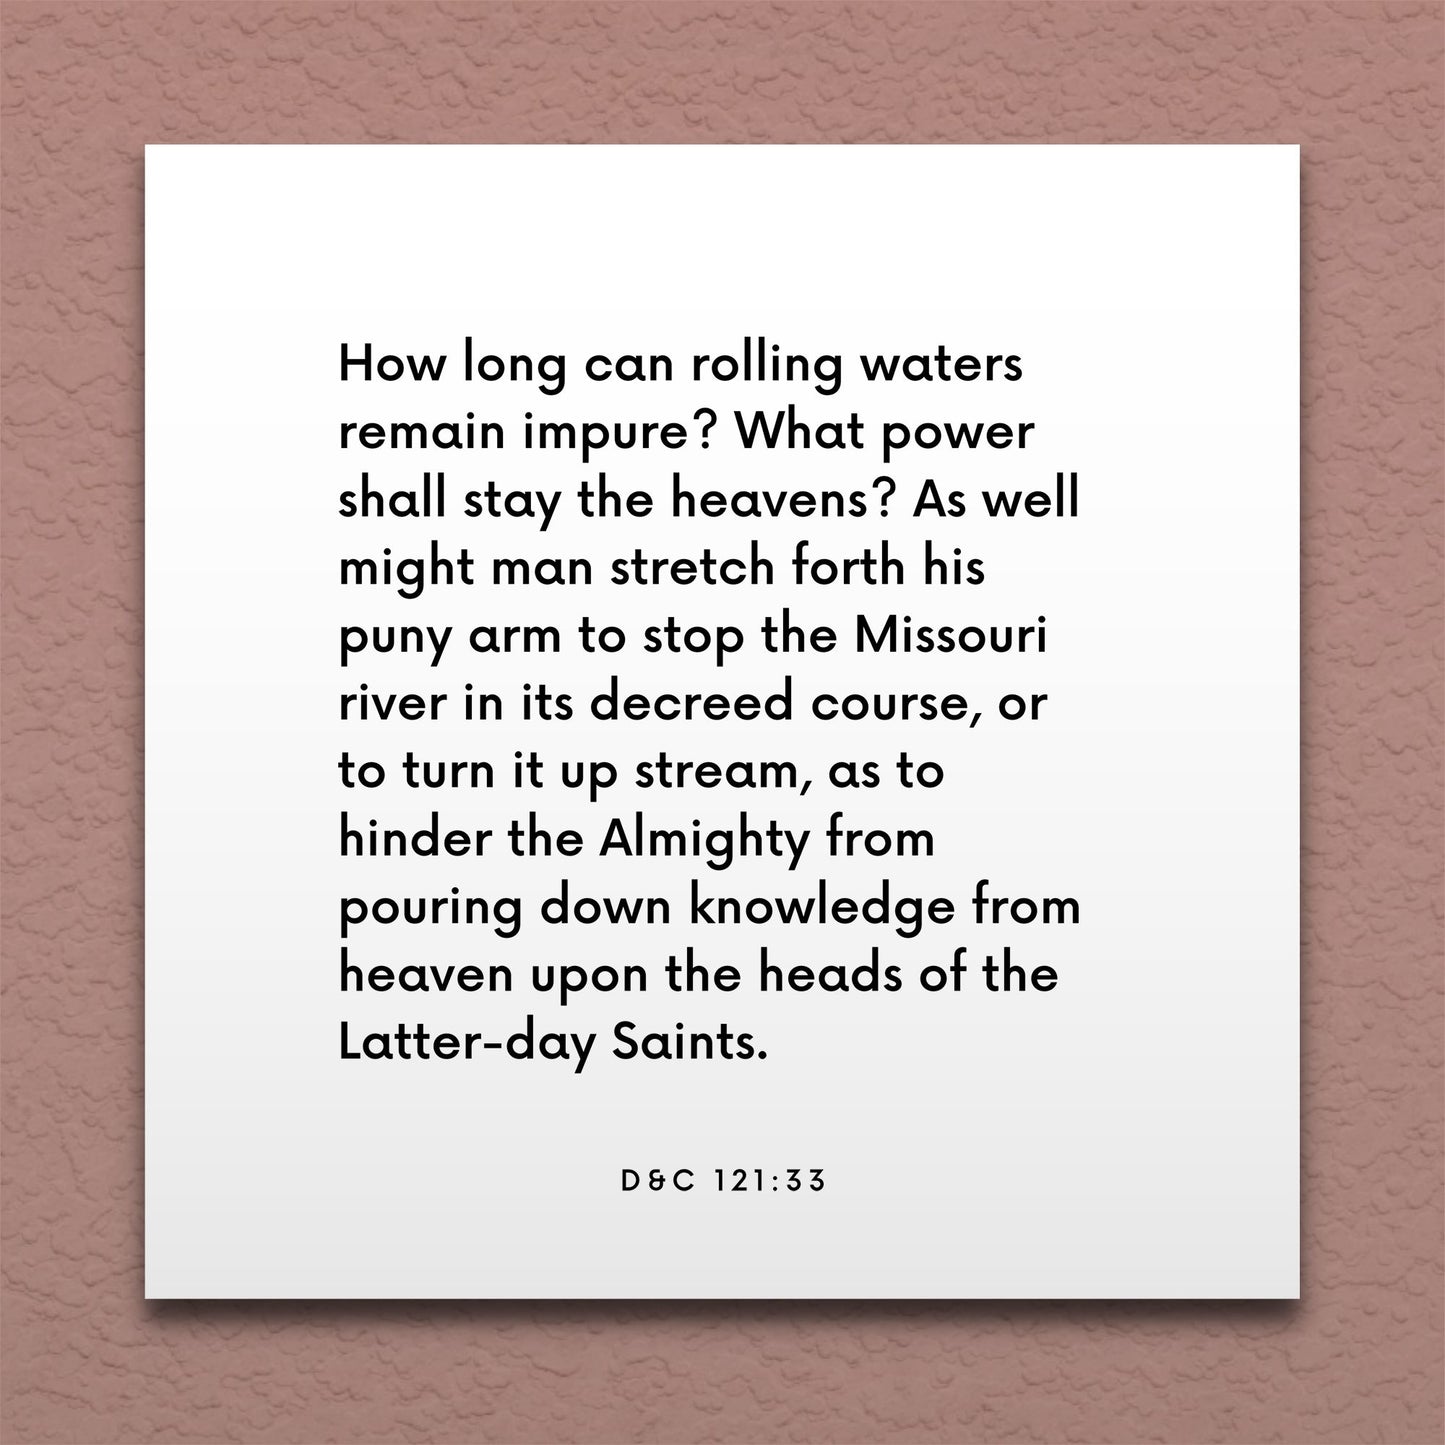 Wall-mounted scripture tile for D&C 121:33 - "How long can rolling waters remain impure?"